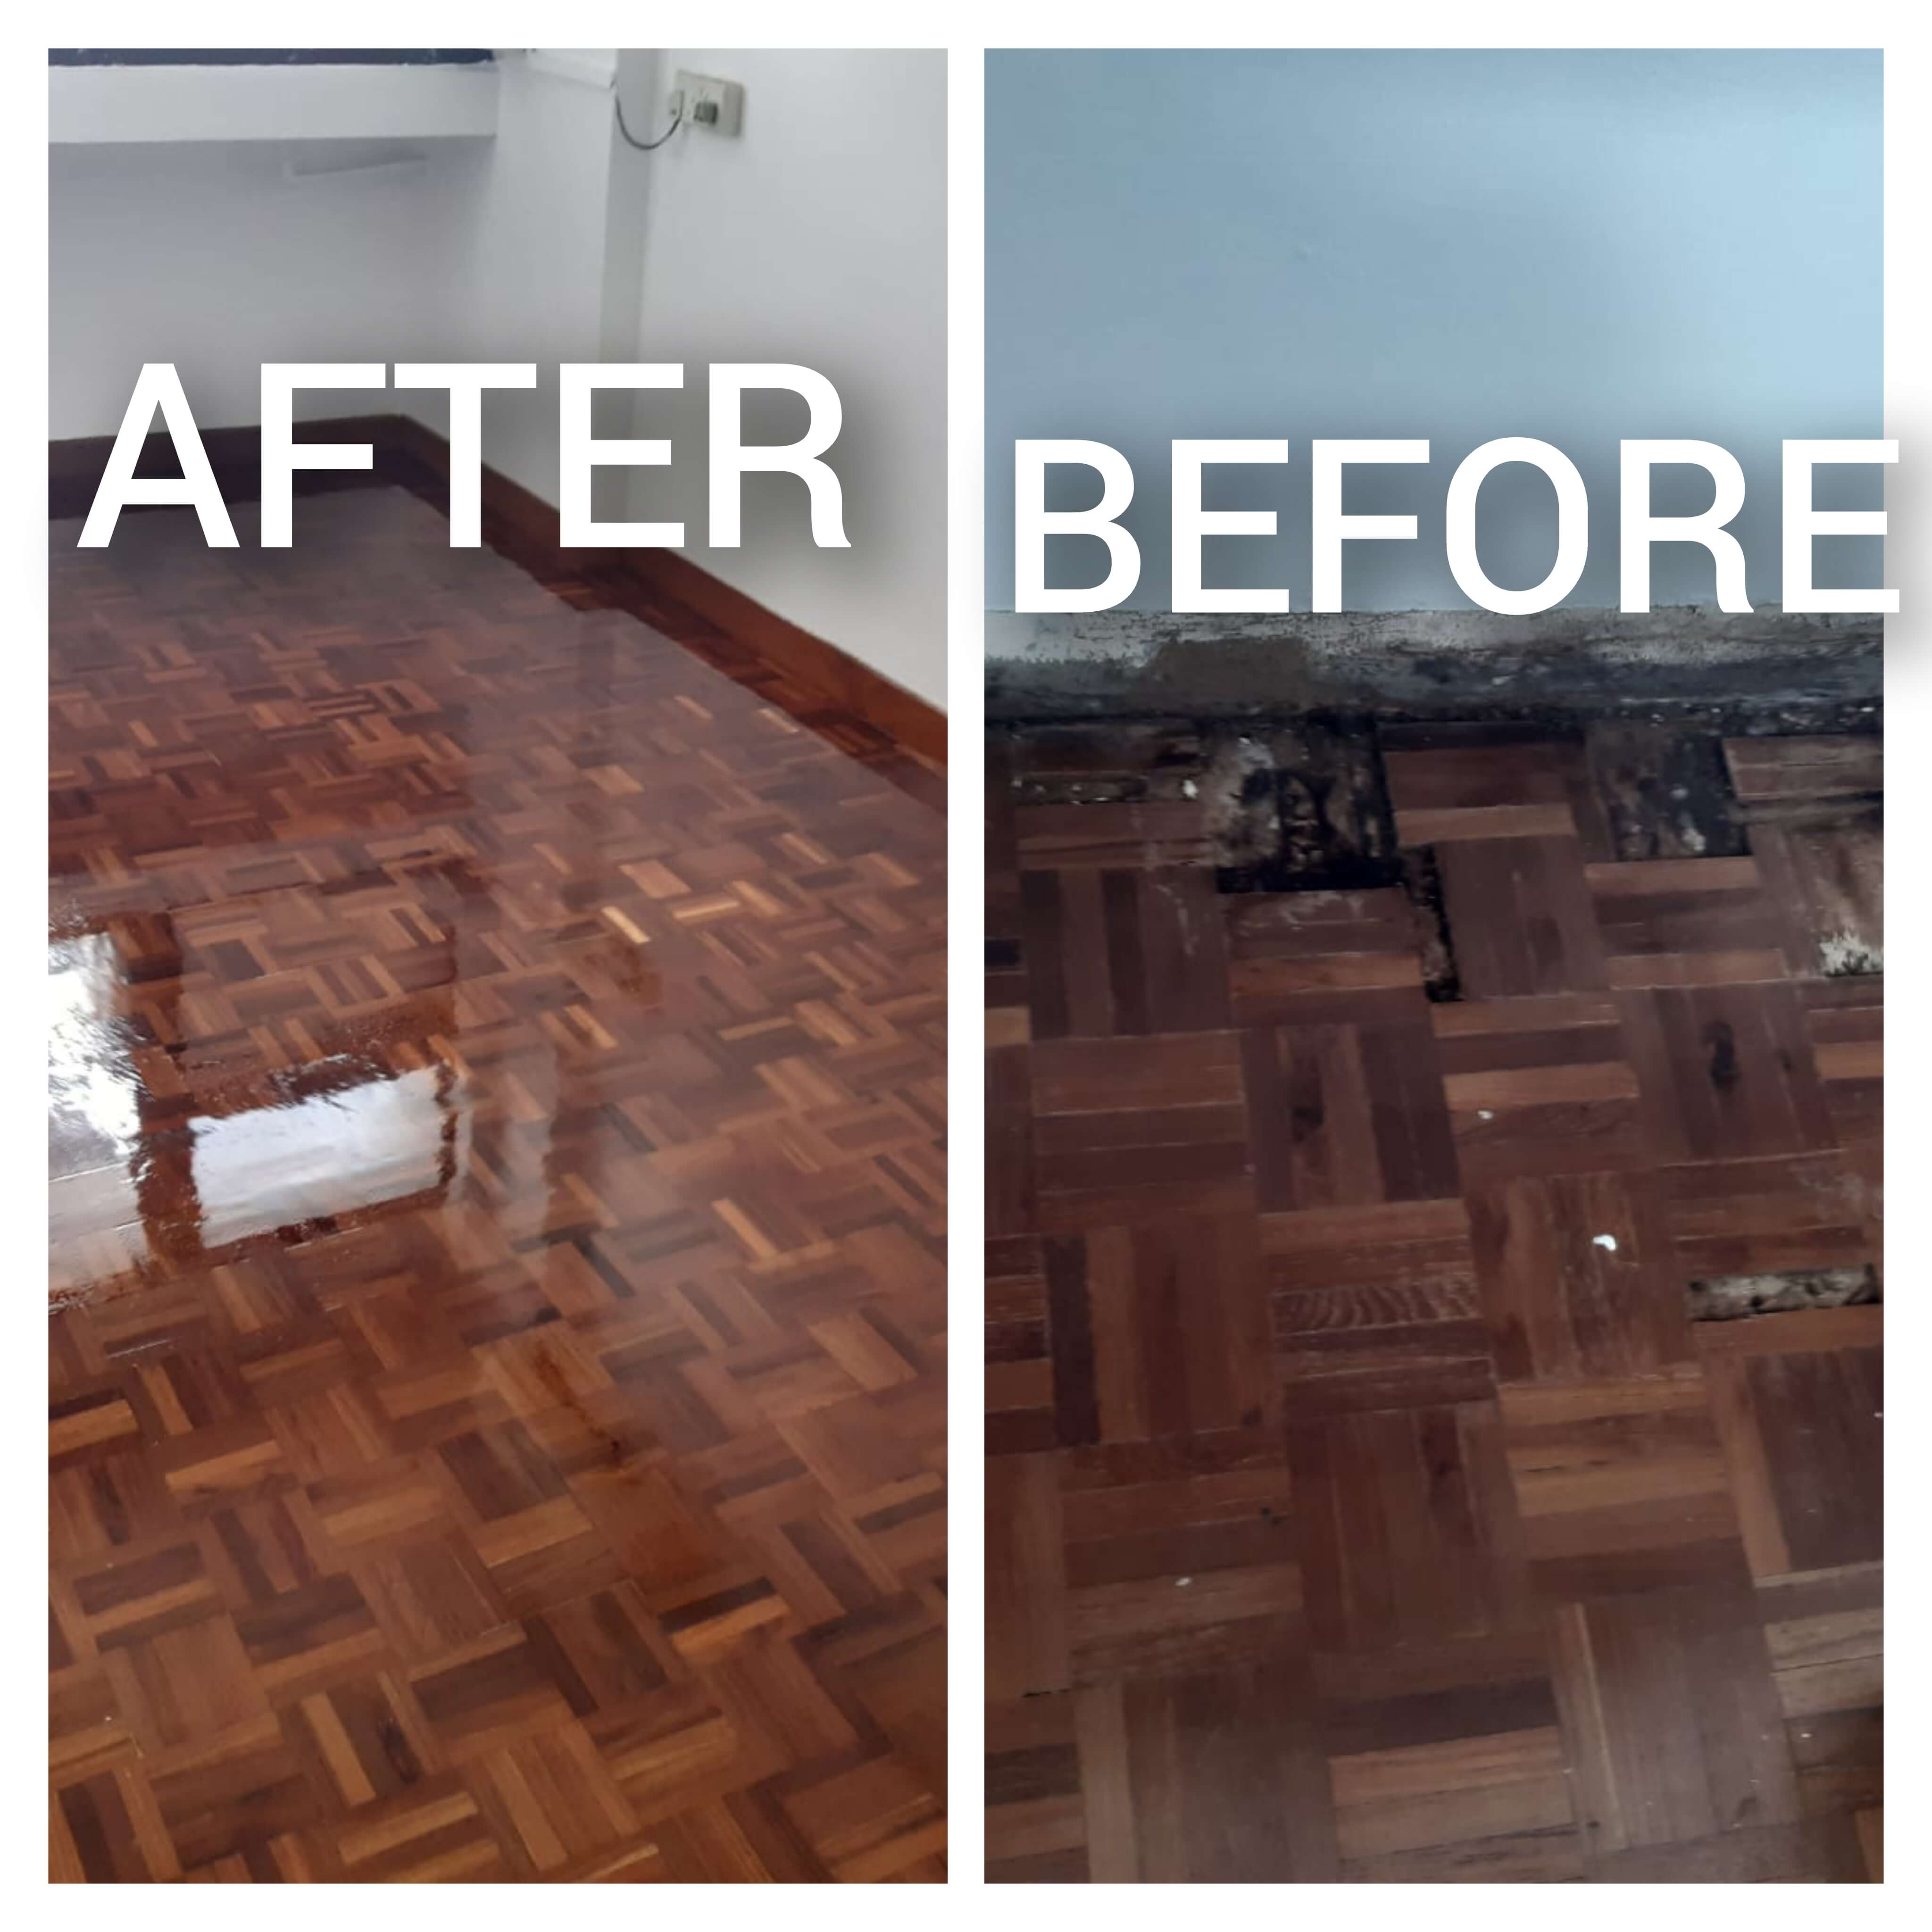 Before Parquet floor polish and after parquet floor polish looks like shiny.